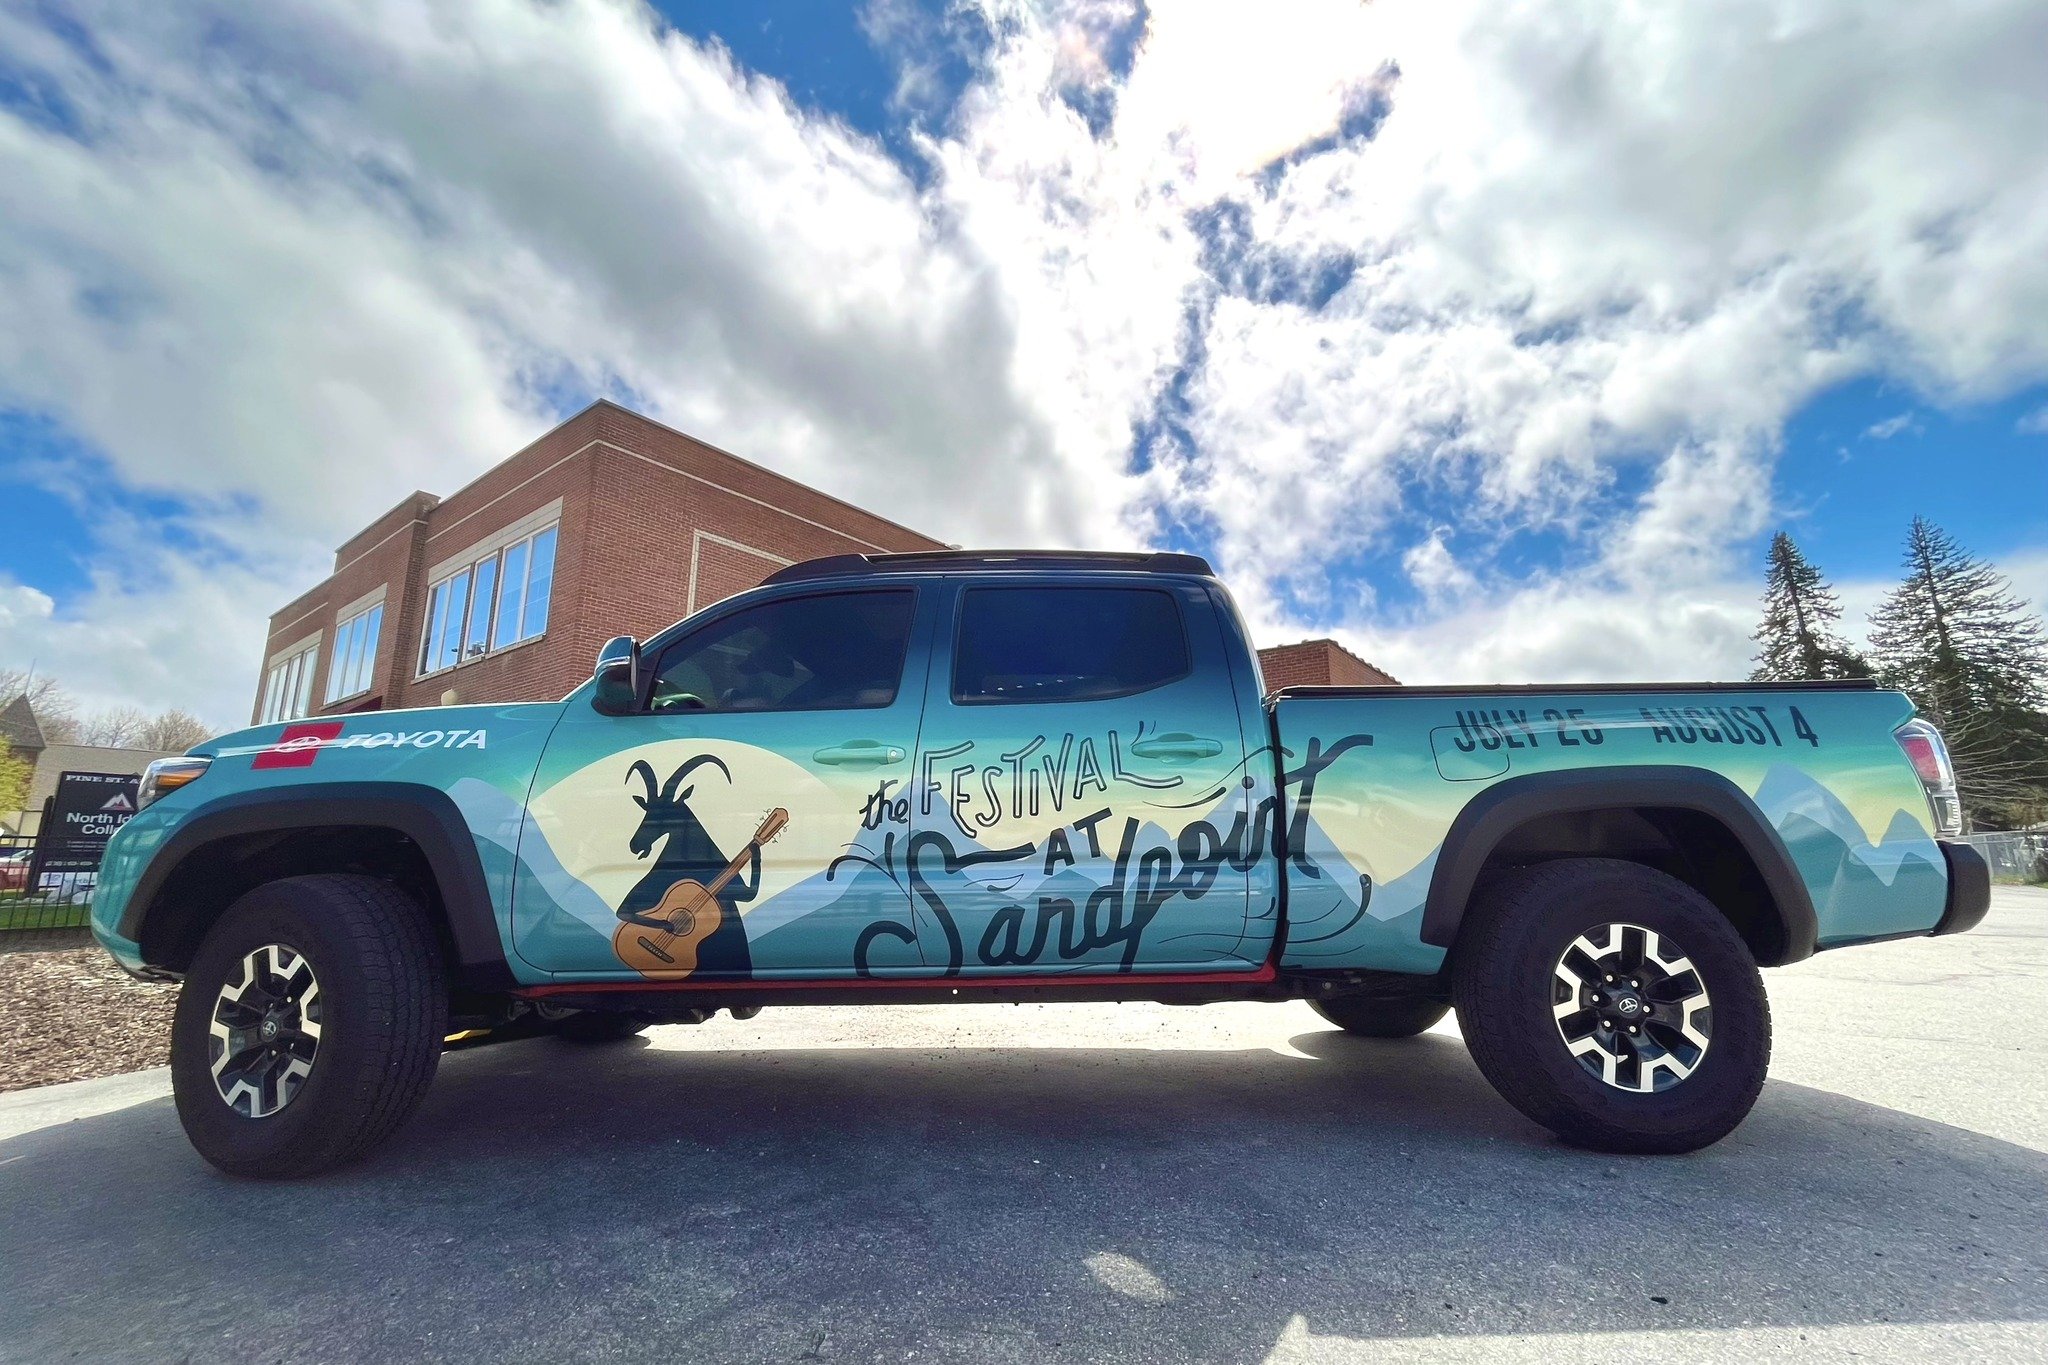 Have you seen this truck driving around lately? 

Thanks to @toyota, we have a brand new 2023 Tacoma TRD with a custom Festival at Sandpoint wrap inspired by the 2024 Series Lineup Poster by @wild_design_by_magdalena!

Stay tuned for more adventures 